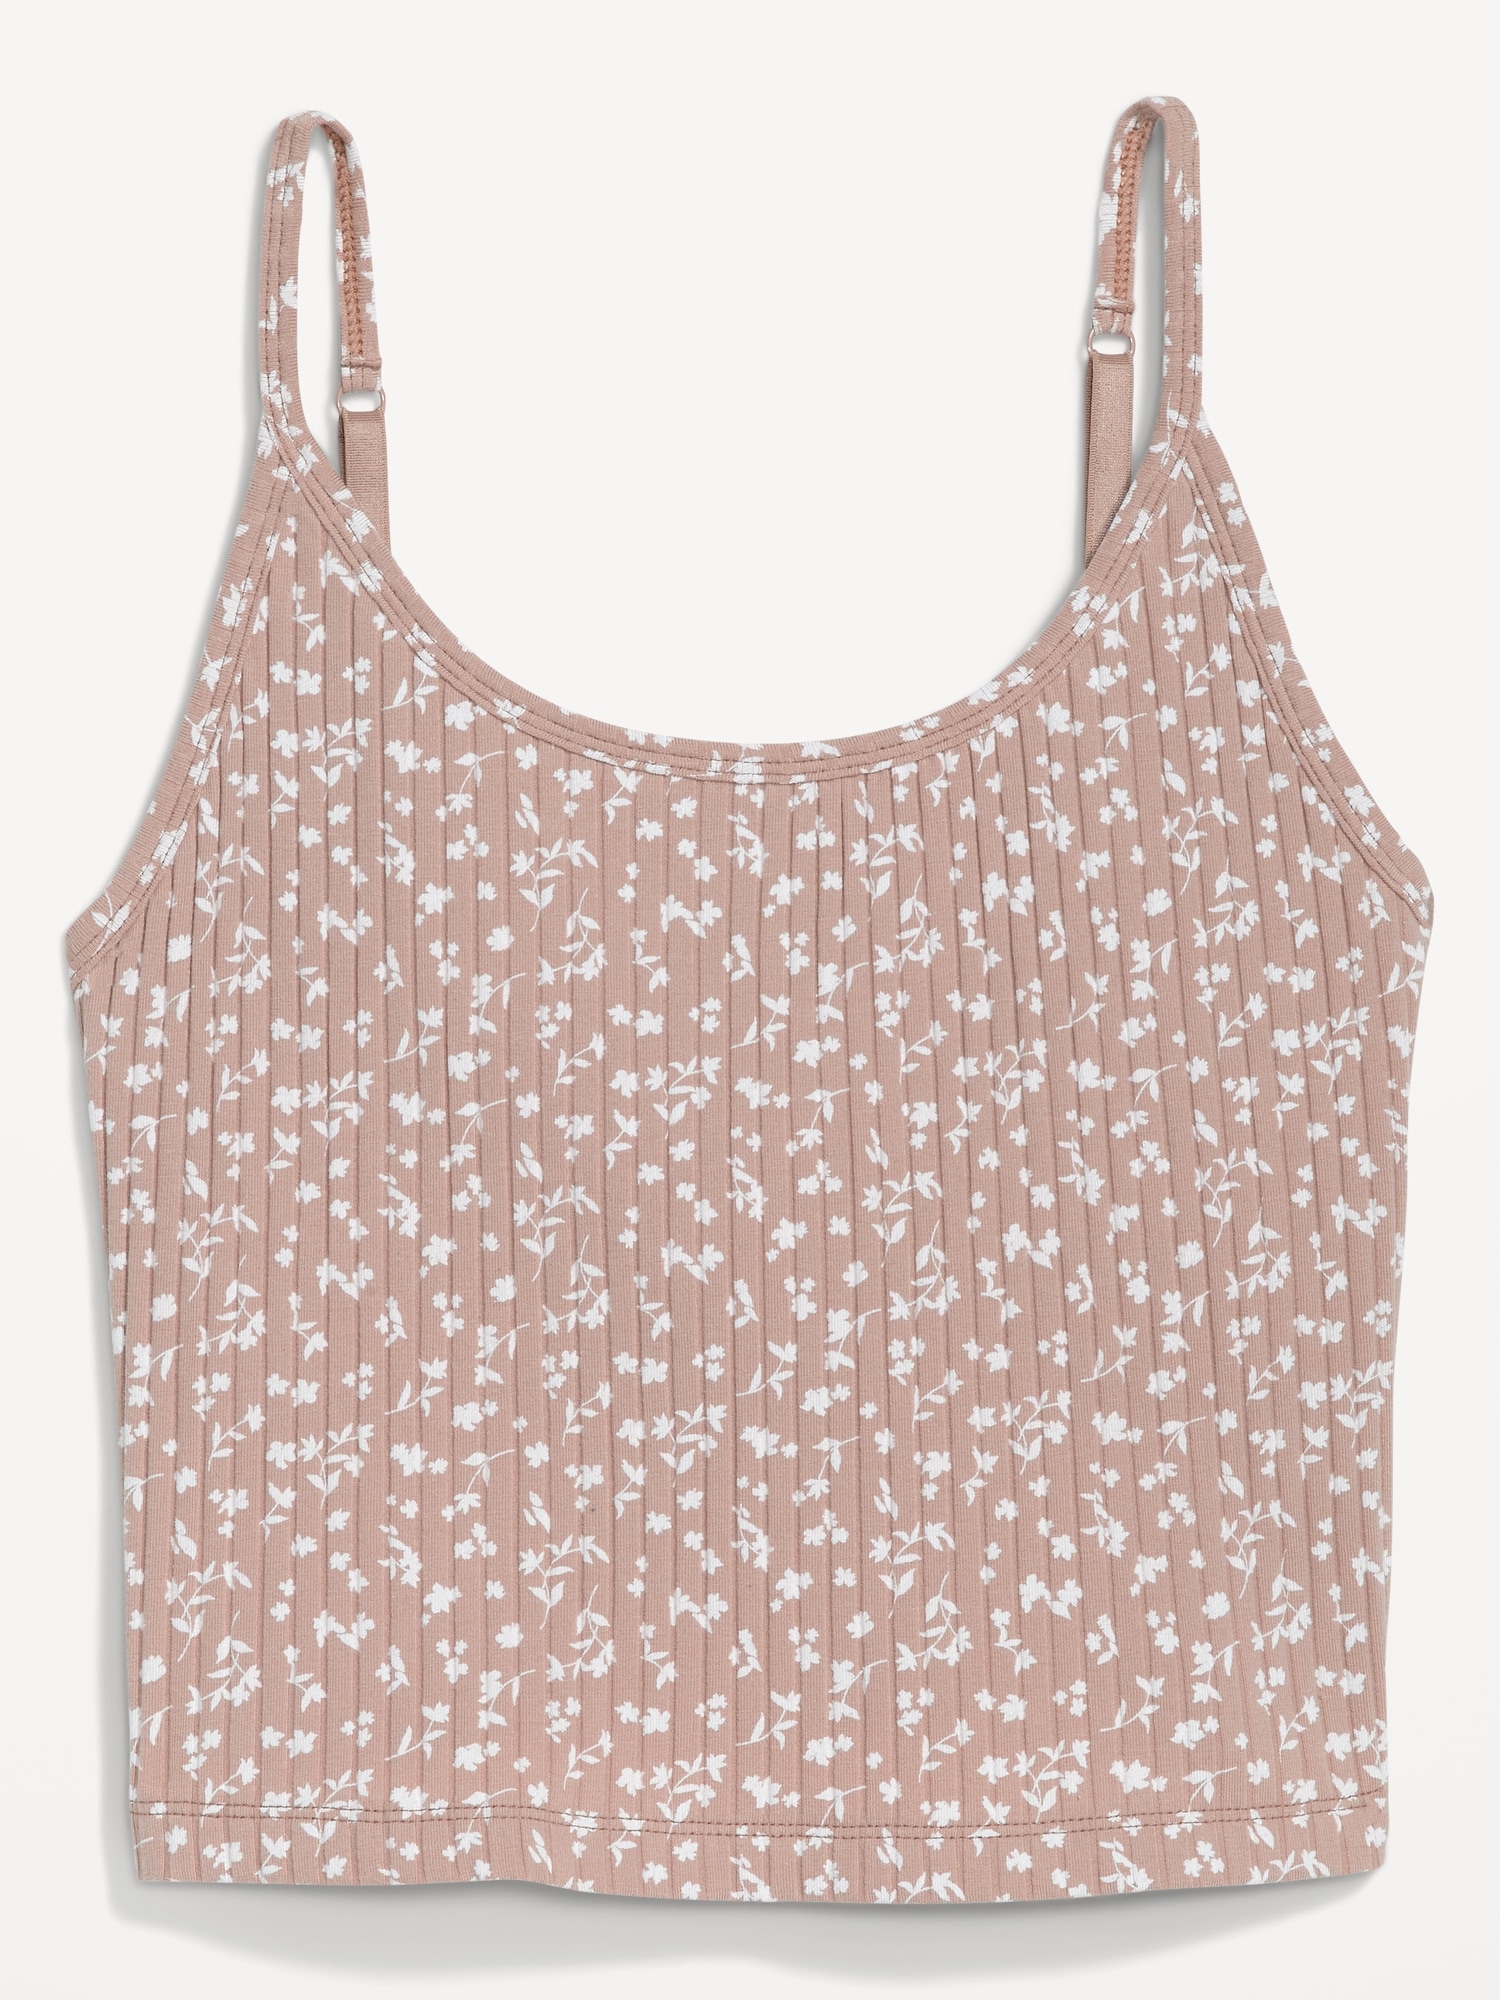 Old Navy Rib-Knit Cropped Tank Top for Women pink - 537465093